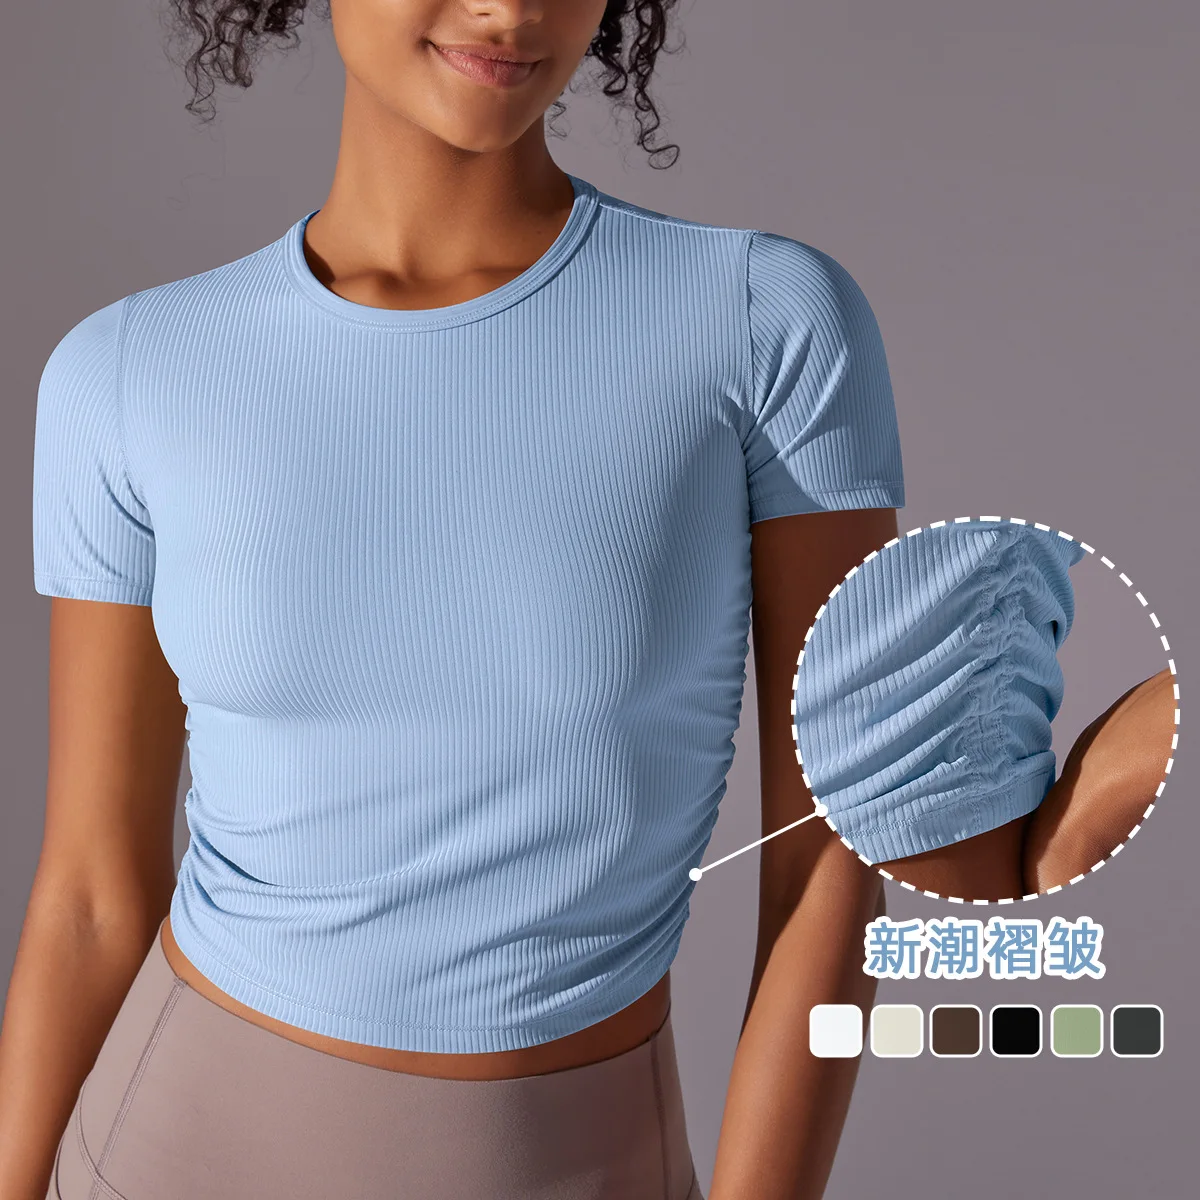 

Seamless Solid Ribbed Yoga Shirts Crop Top Gym Clothes Short Sleeve Sport Top Fitness Women Workout Tops for Women Sports Shirts